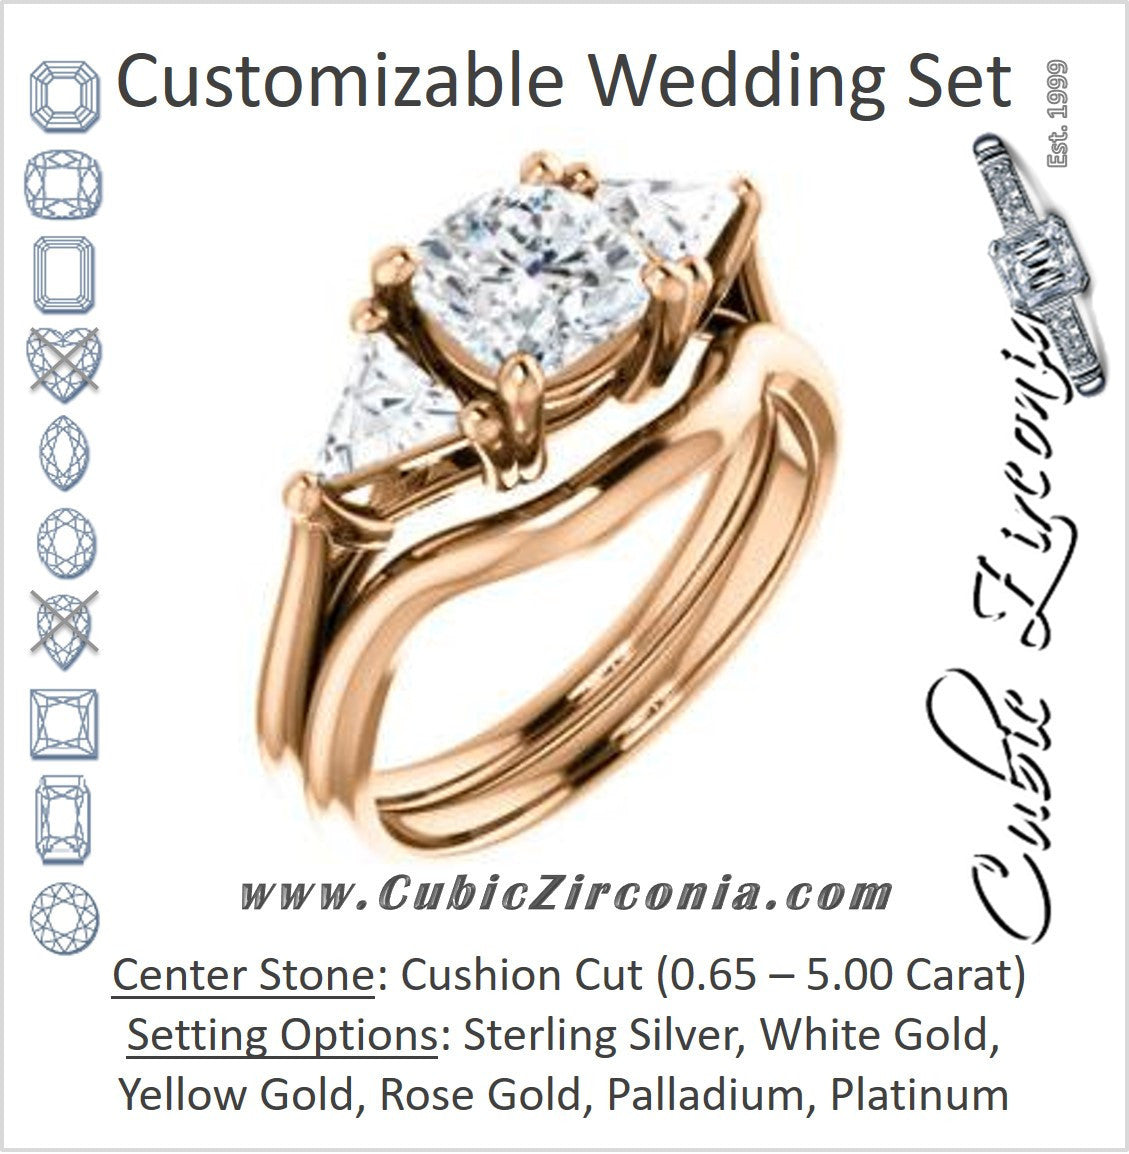 CZ Wedding Set, featuring The Prisma engagement ring (Classic Three-Stone Triangle Accent and Cushion Cut center)